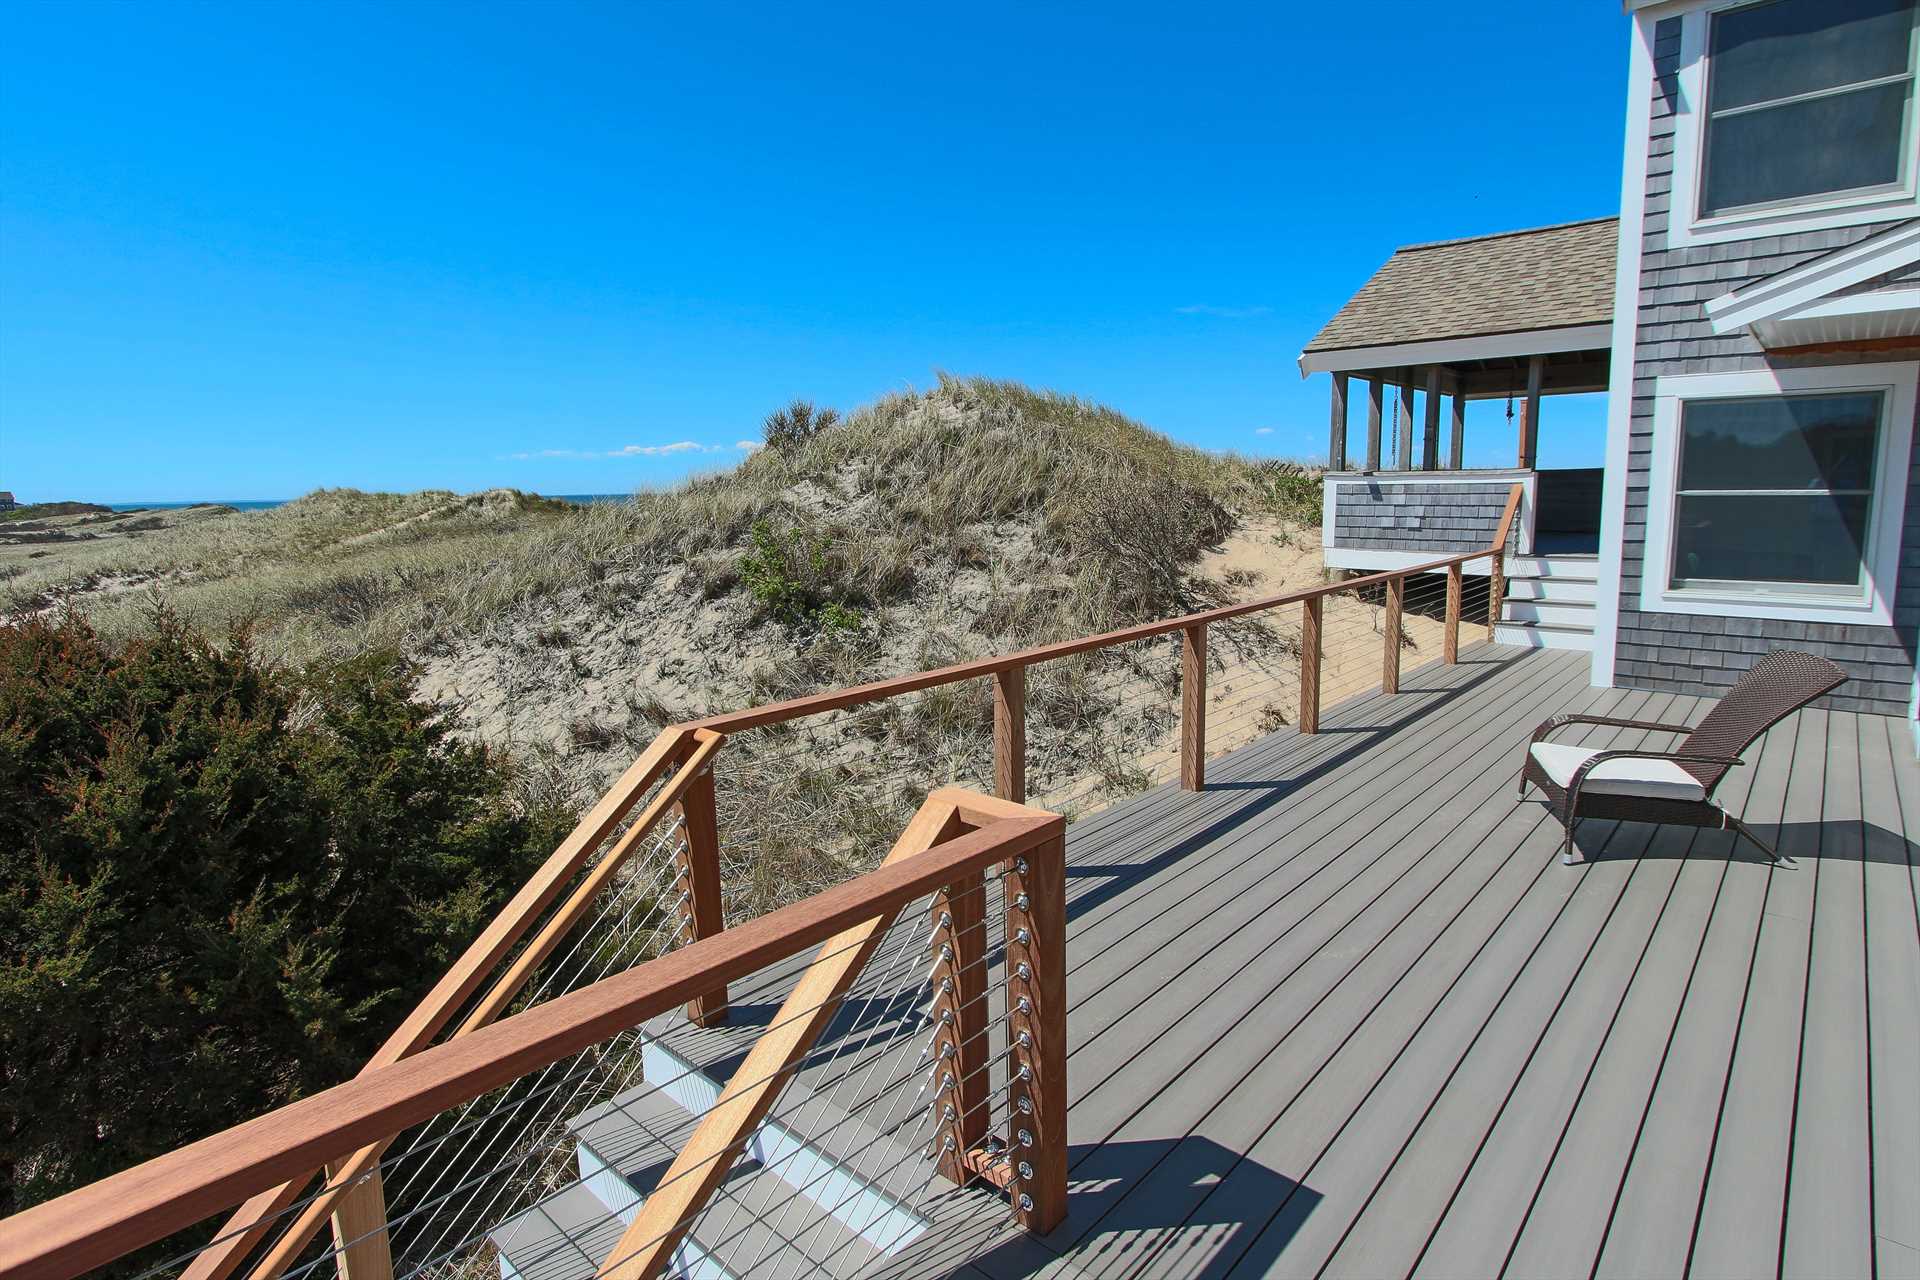 Nestled in the Dune, walk up and enter the house.